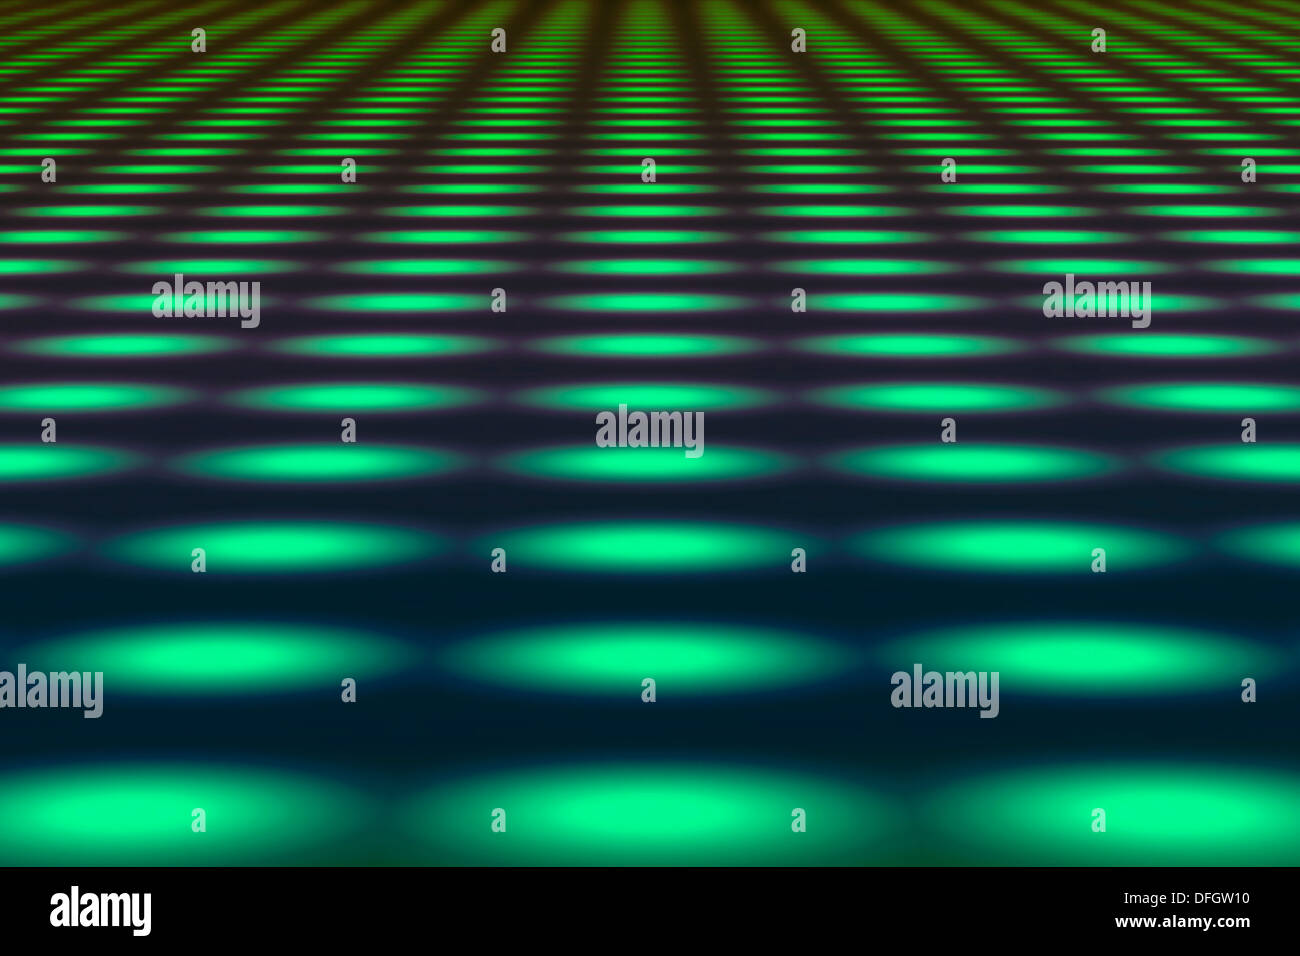 stylized disco floor with green light spots Stock Photo